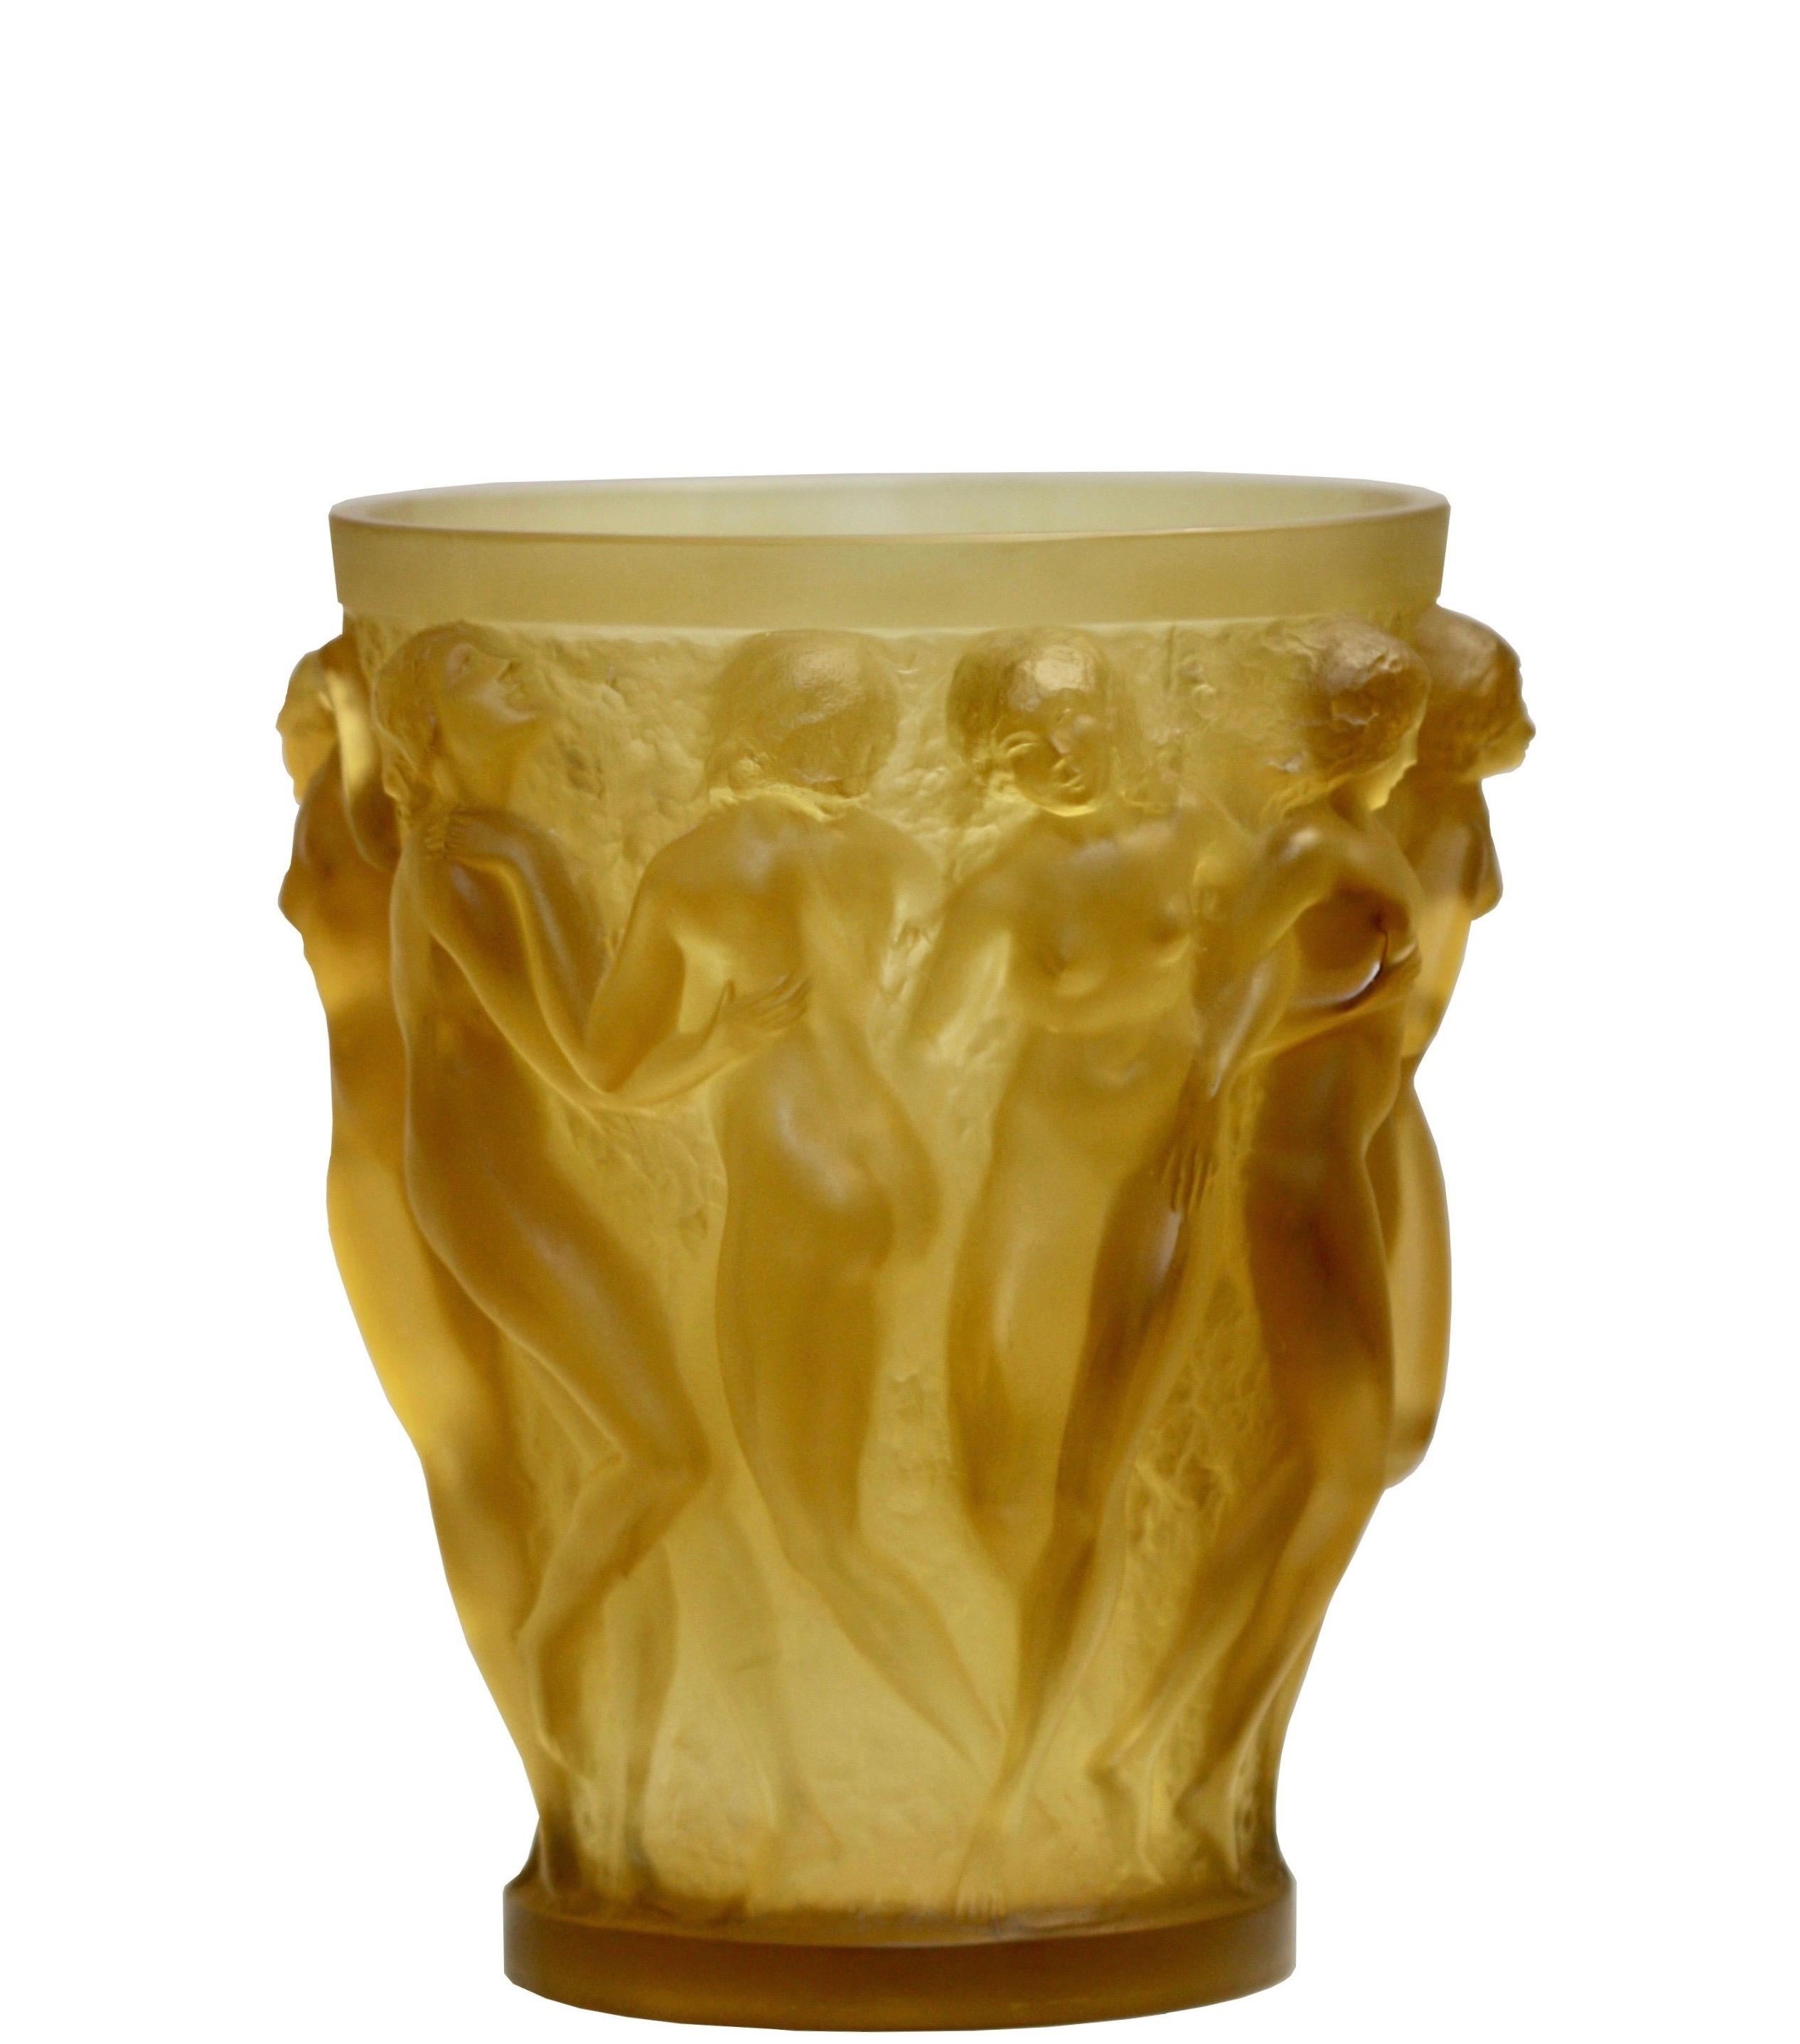 René Lalique (1860-1945)
Bacchantes
Yellow Rene Lalique glass vase with ten female nude figures in high relief on a self illuminating bronze base, cast with stylized oak leaves.
Wheel-carved Rene Lalique France
France, circa 1920
Height 9.5